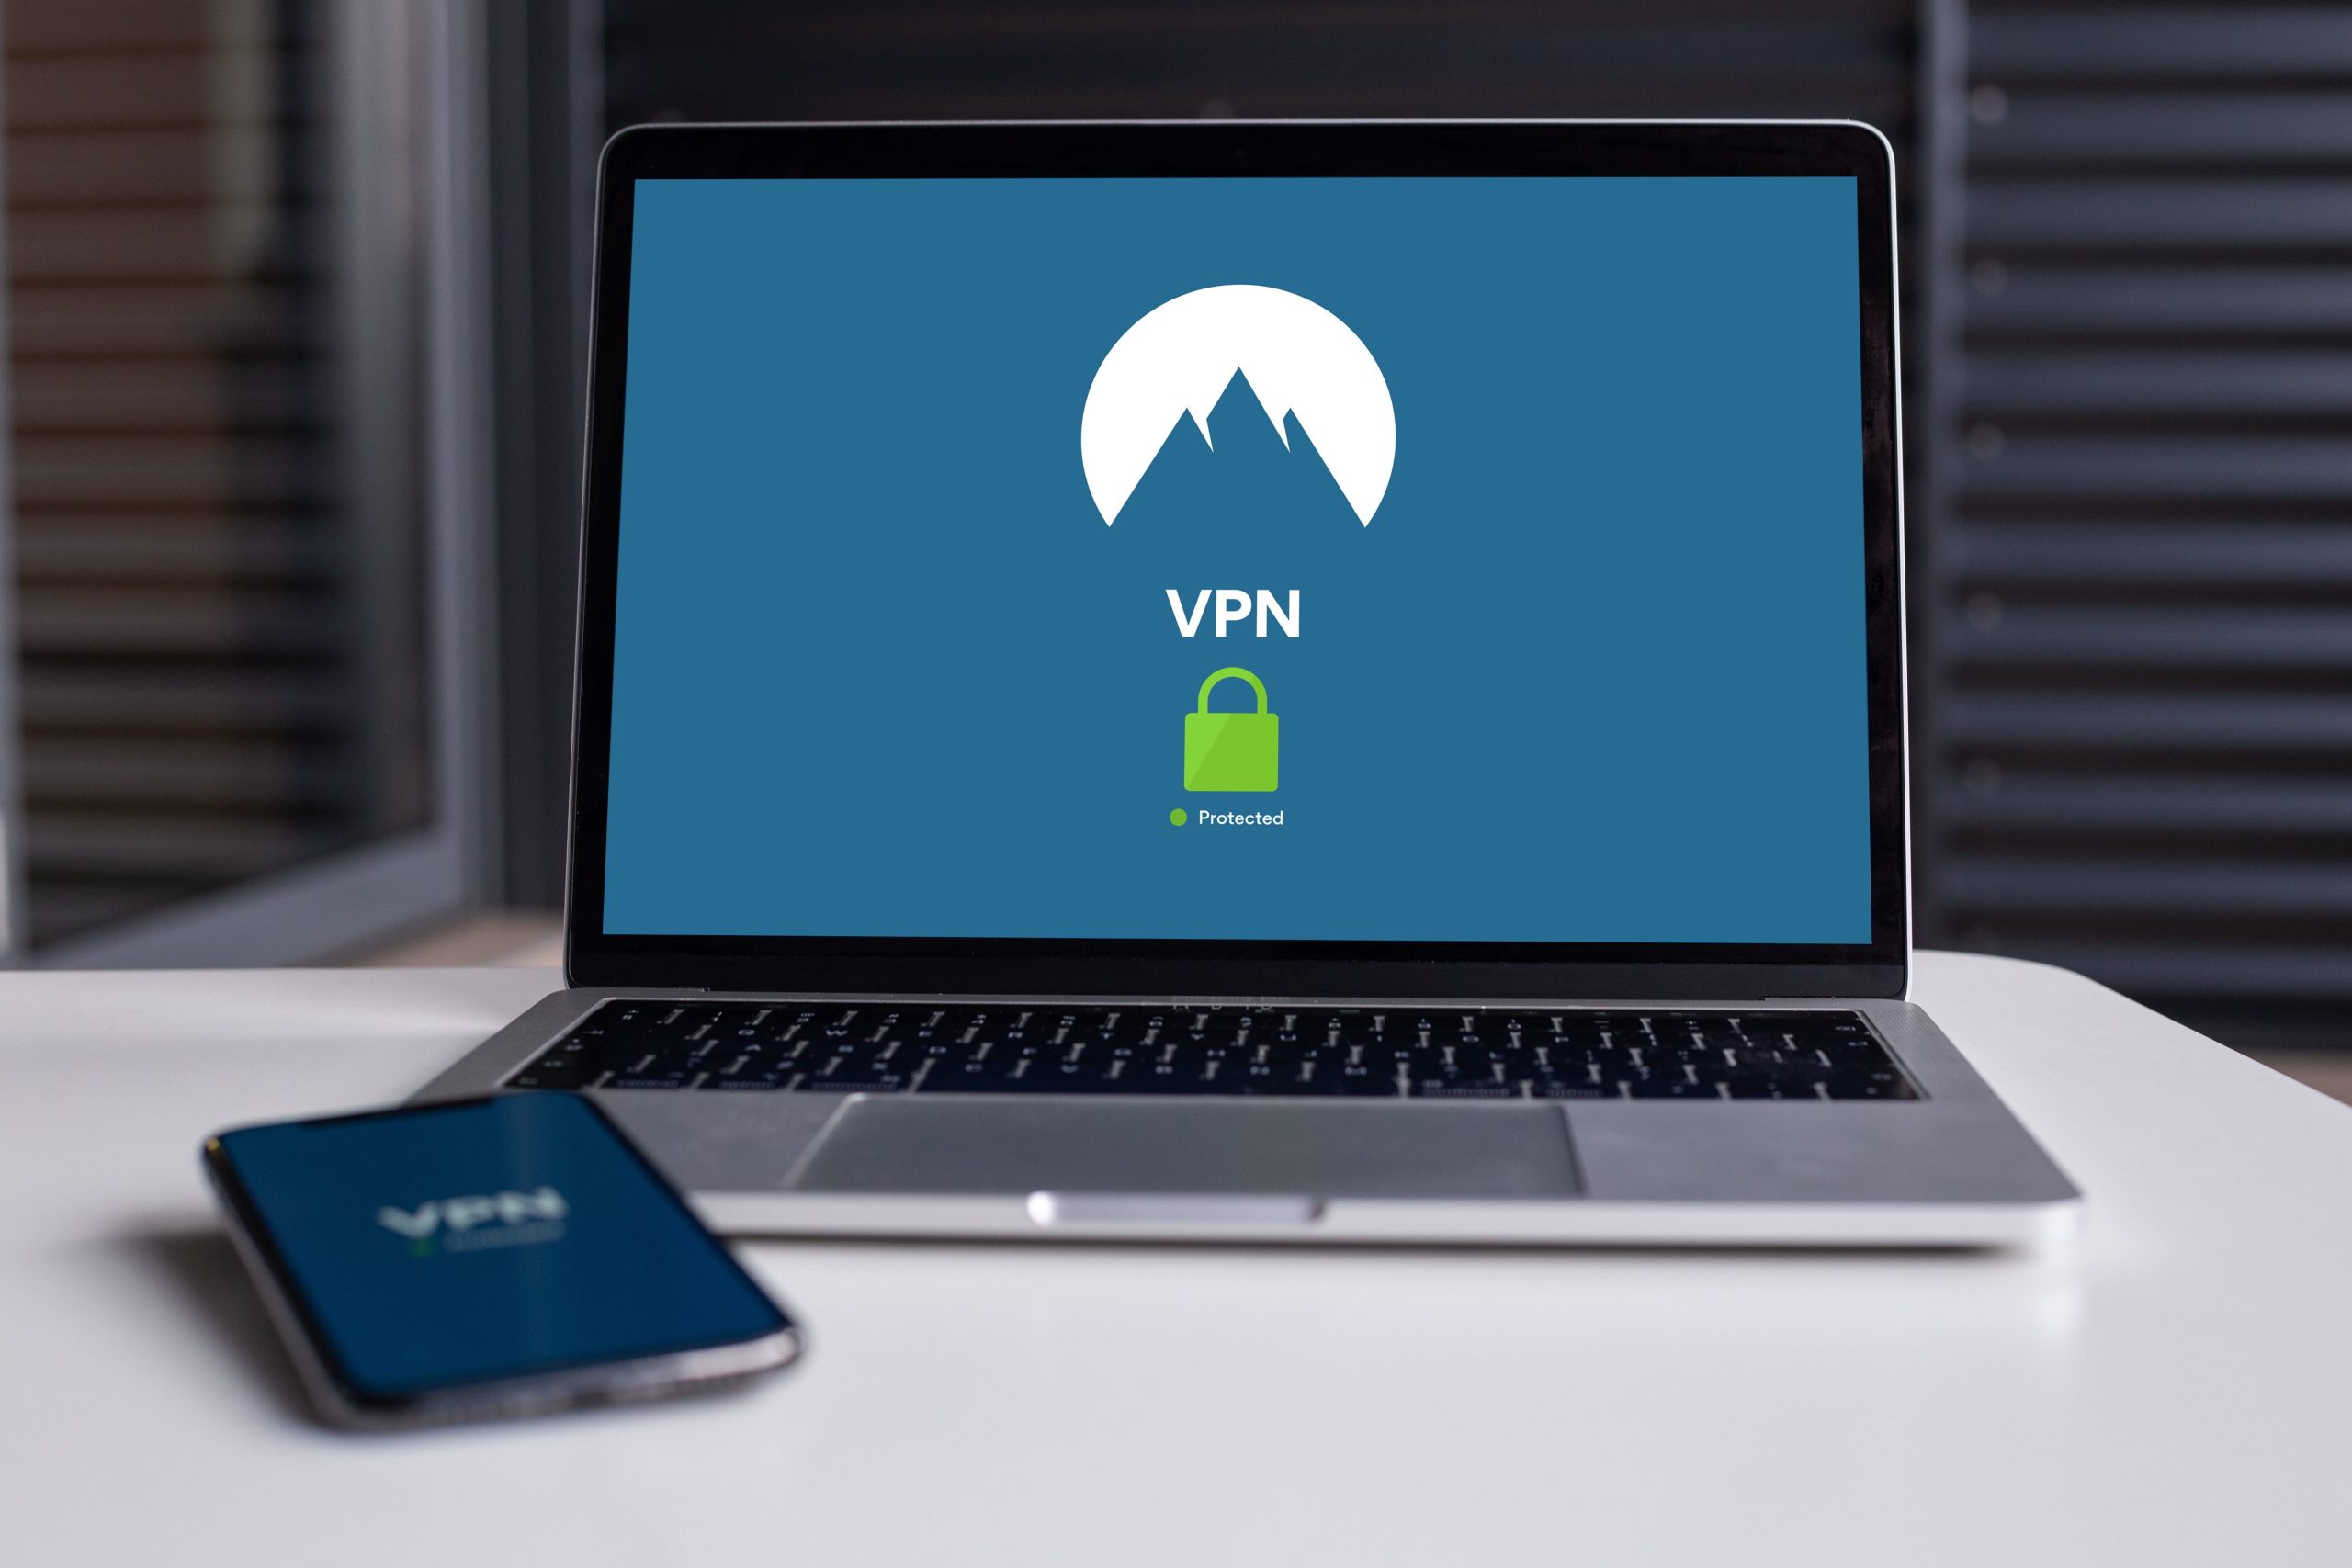 vpn protected or scam?